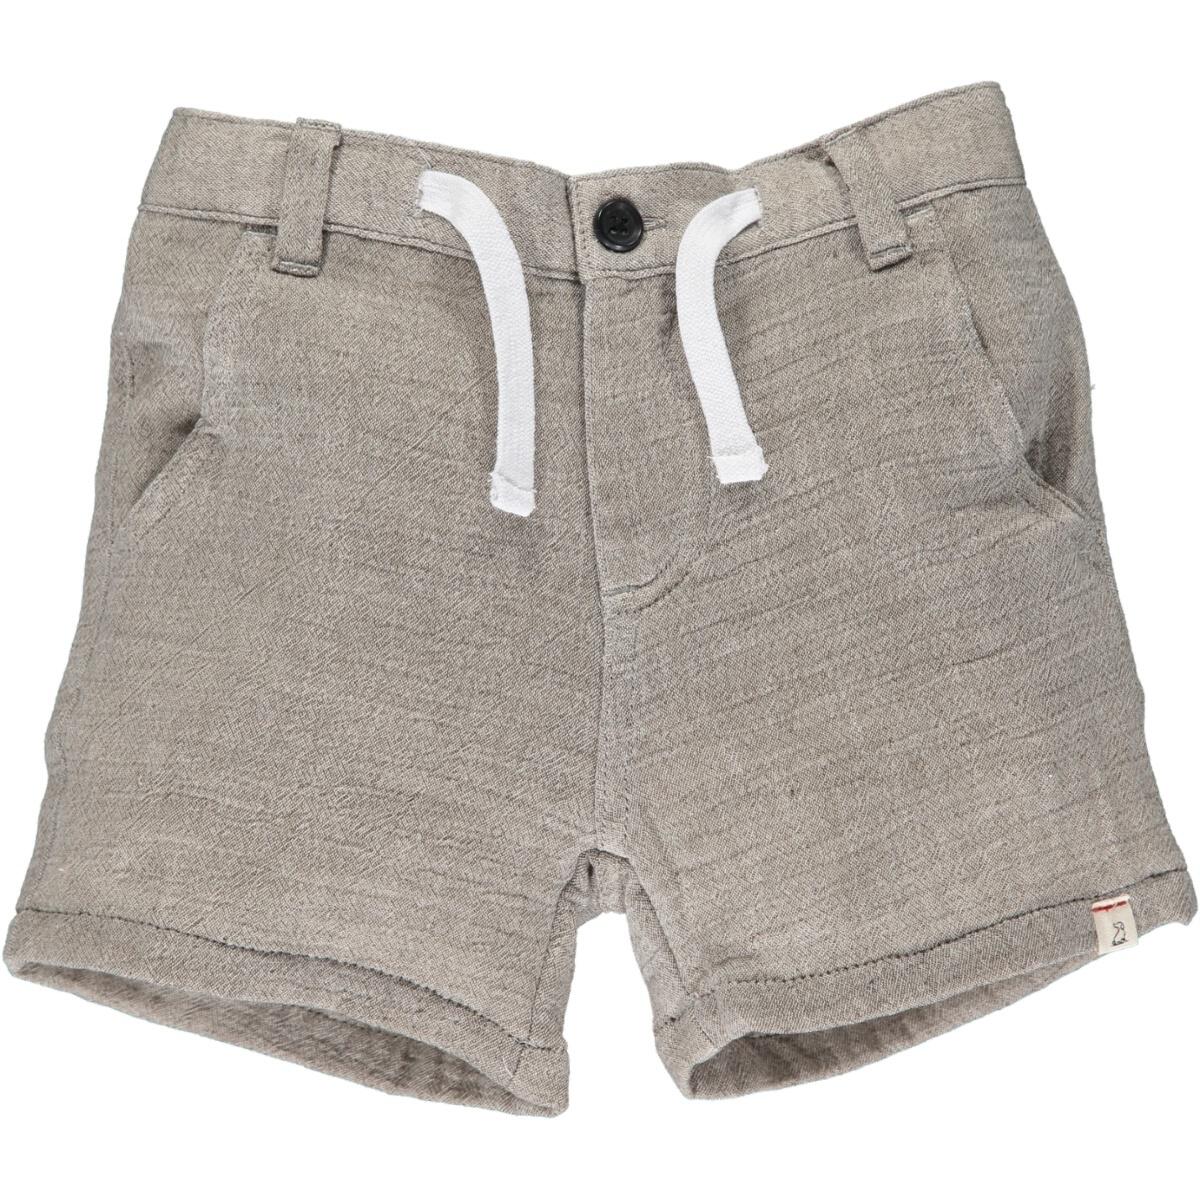 Smart and Styling Shorts